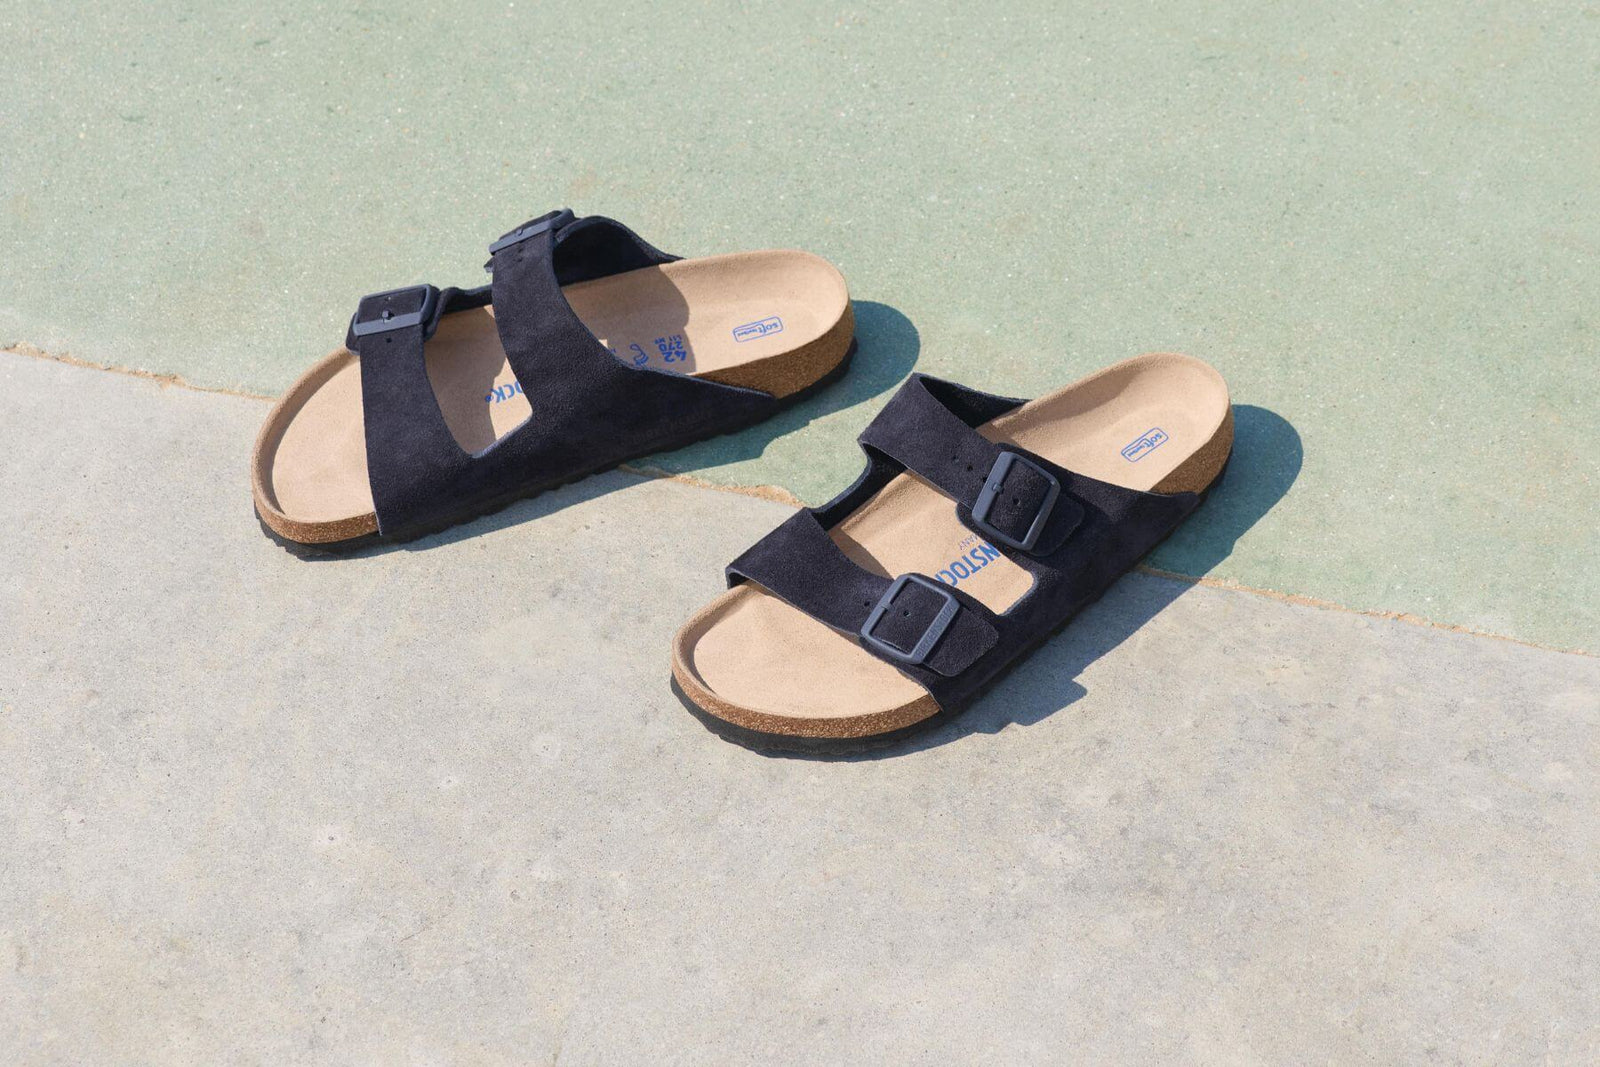 How Birkenstock went from 'ugly' sandal to trendy fashion staple: the  popular German LVMH-owned footwear brand elevated its status with Barbie,  Kendall Jenner and collaborations with Valentino | South China Morning Post